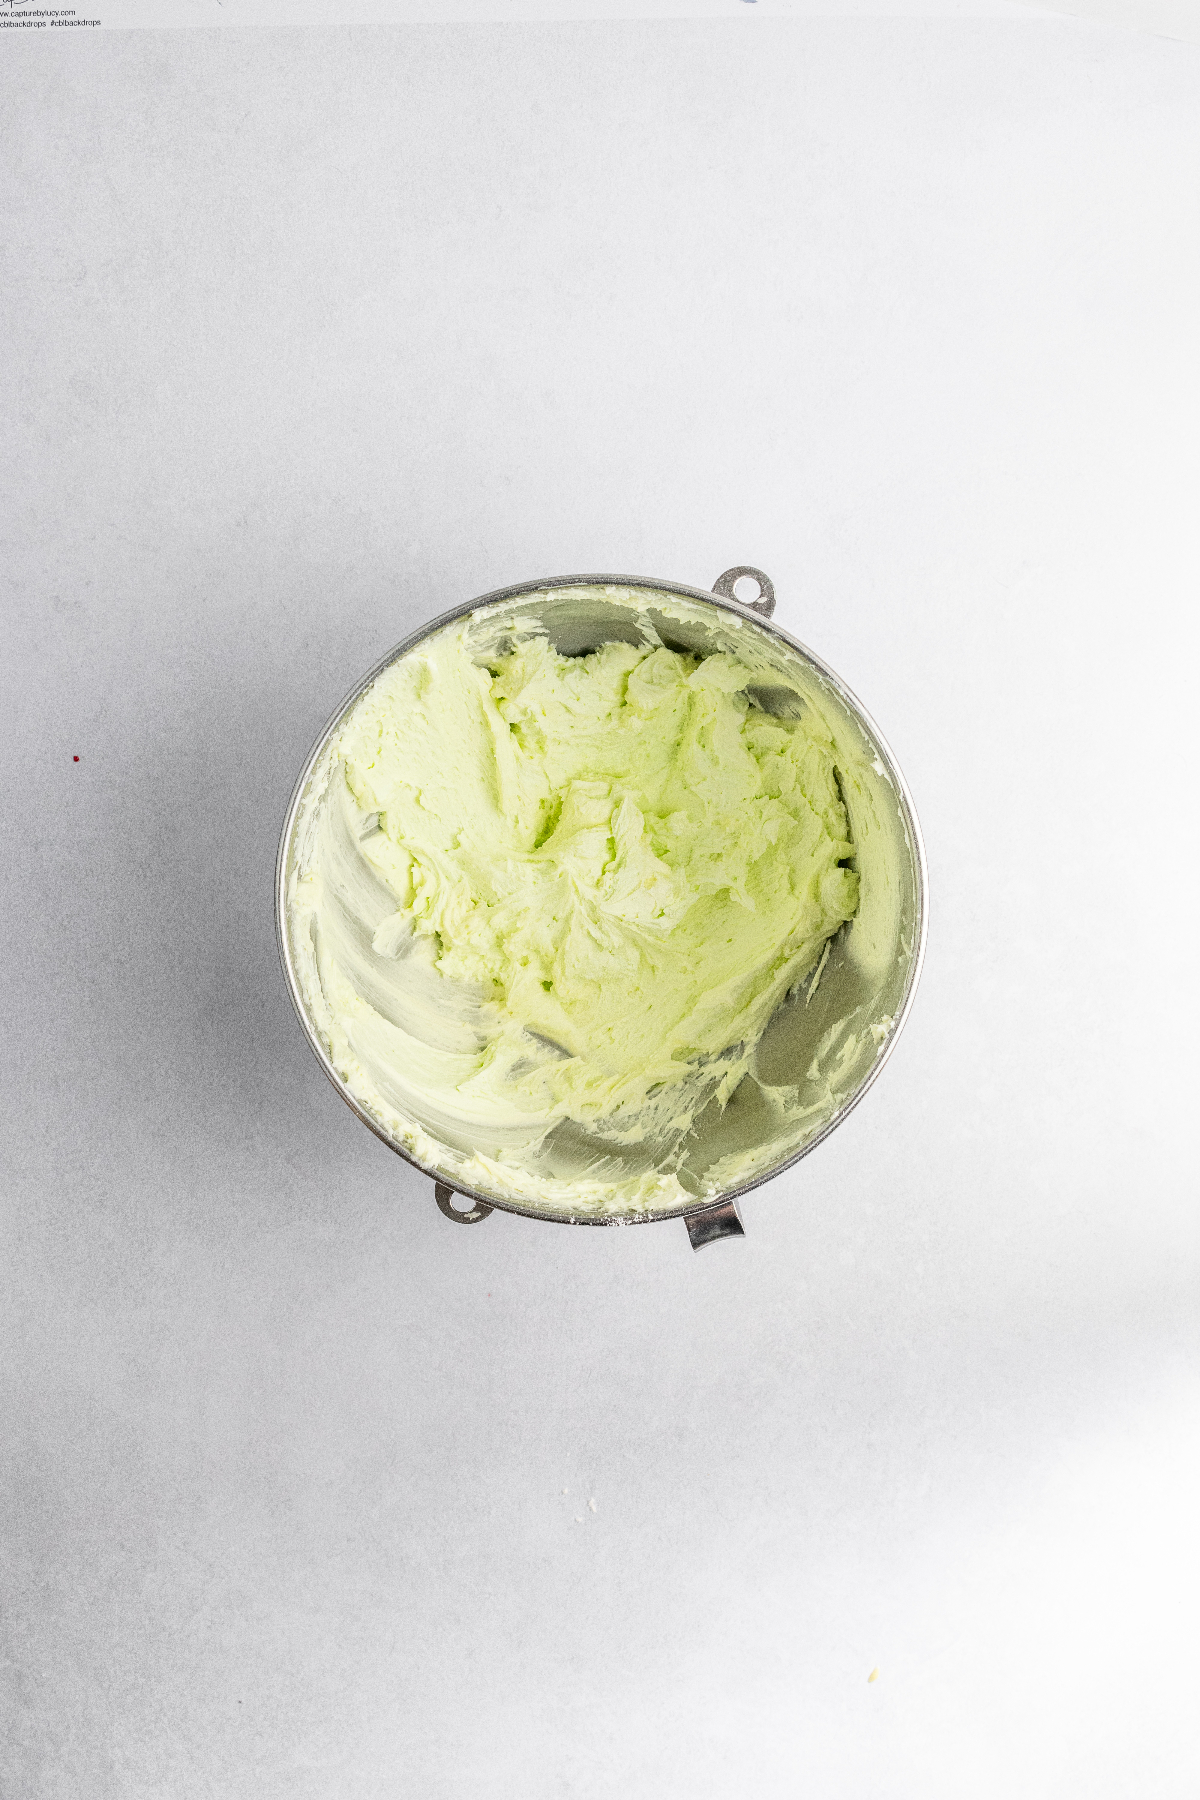 Green mint frosting in stand mixer bowl.